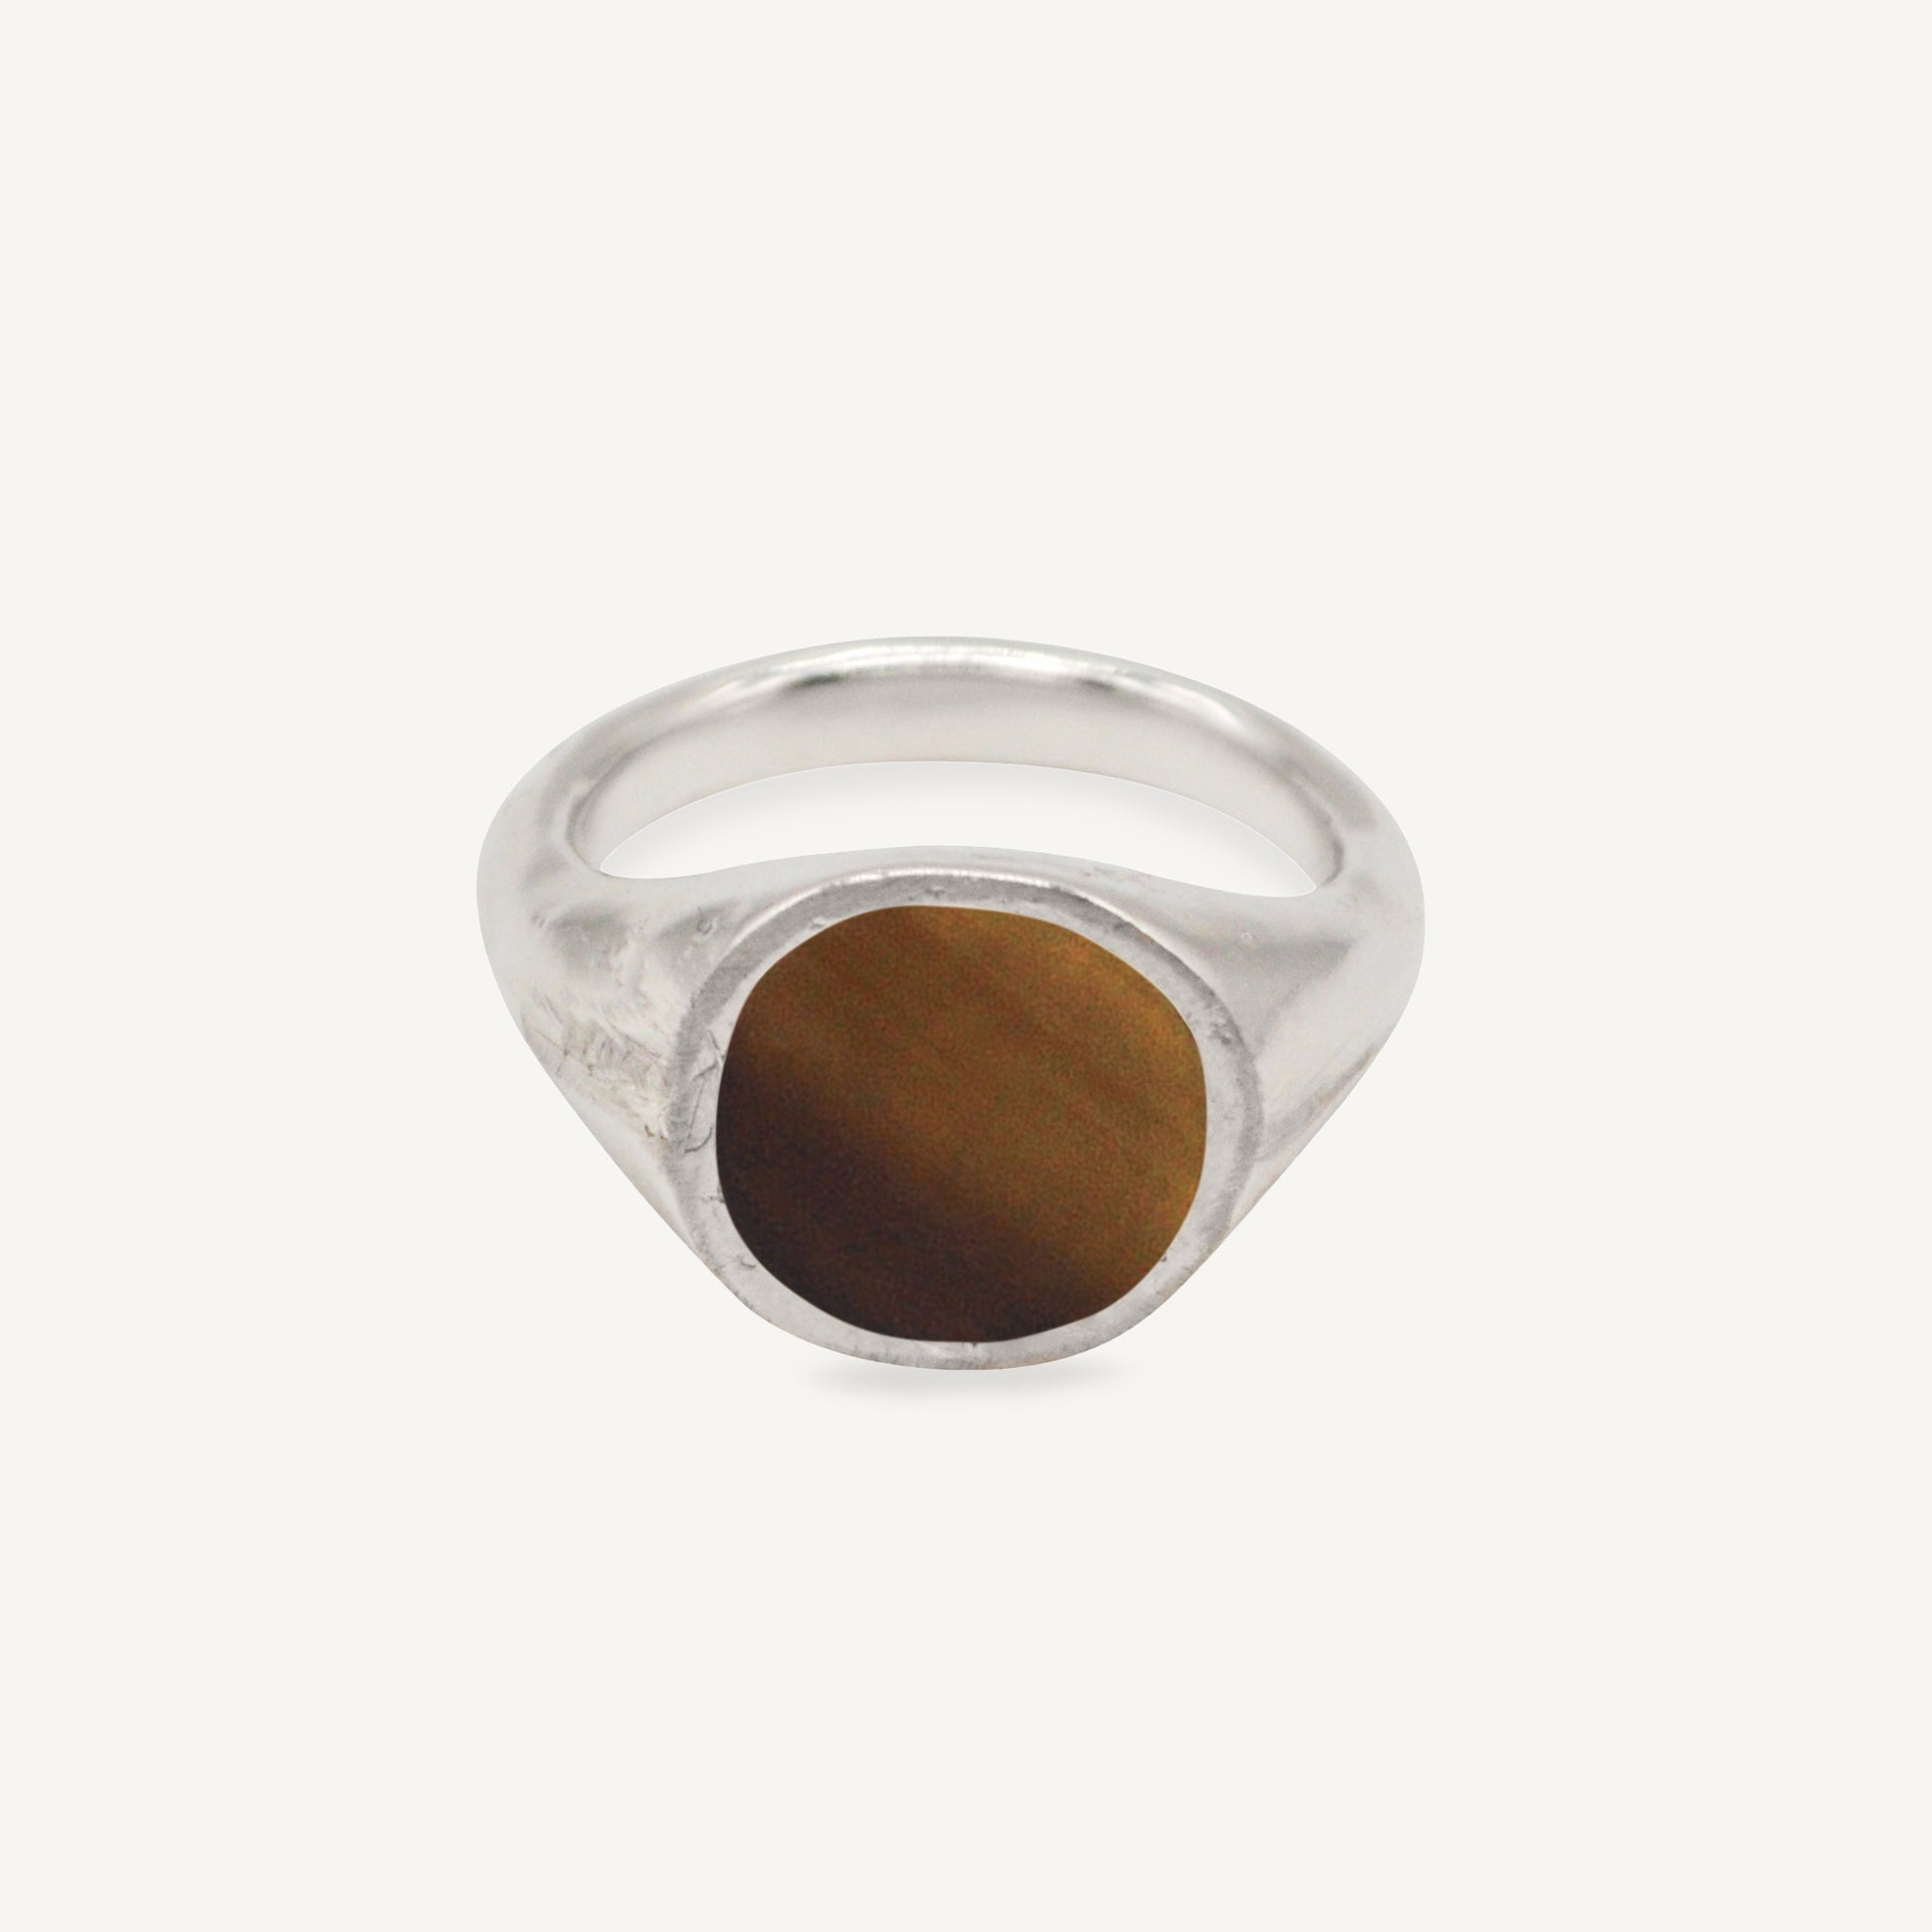 The RAY ring is a chunky silver and horn signet ring with organic textured silver finish ethically handmade in London from recycled silver by Folde Jewellery